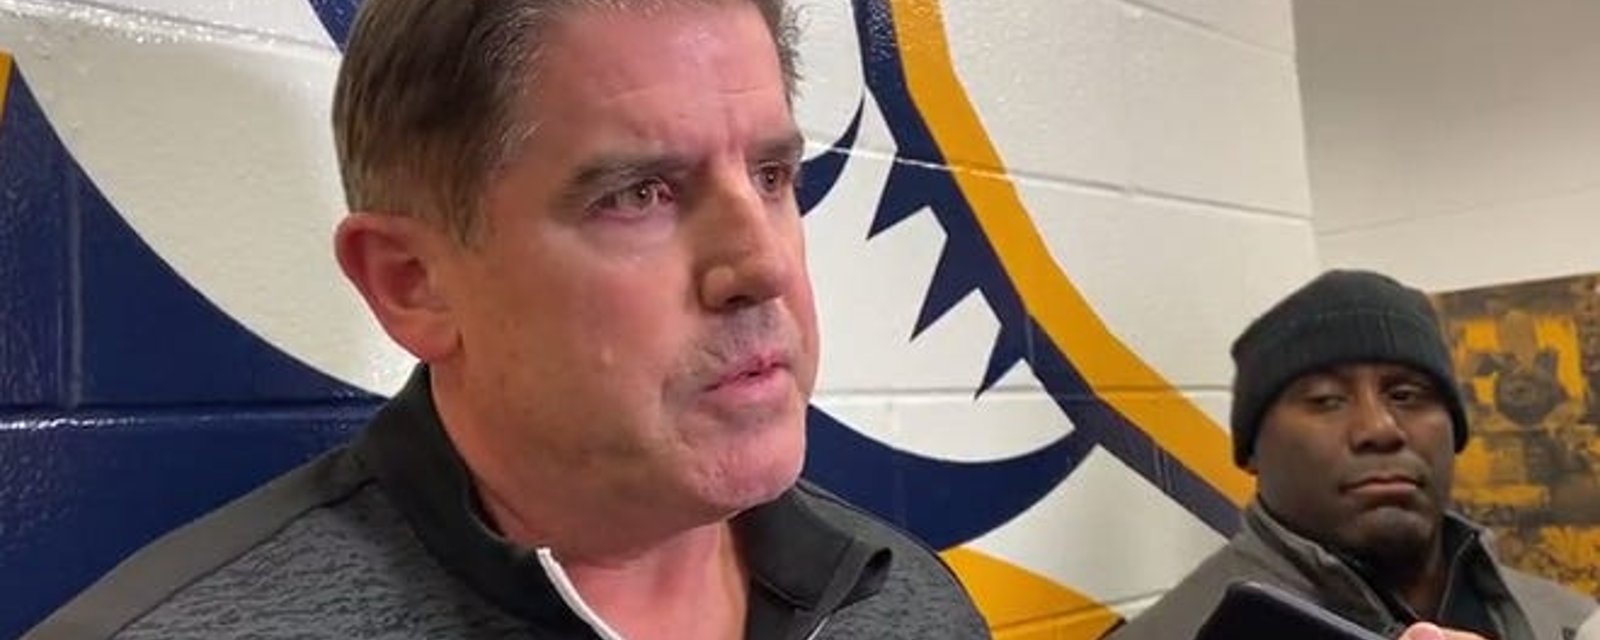 Peter Laviolette responds to video showing him punching Ville Leino in the head.